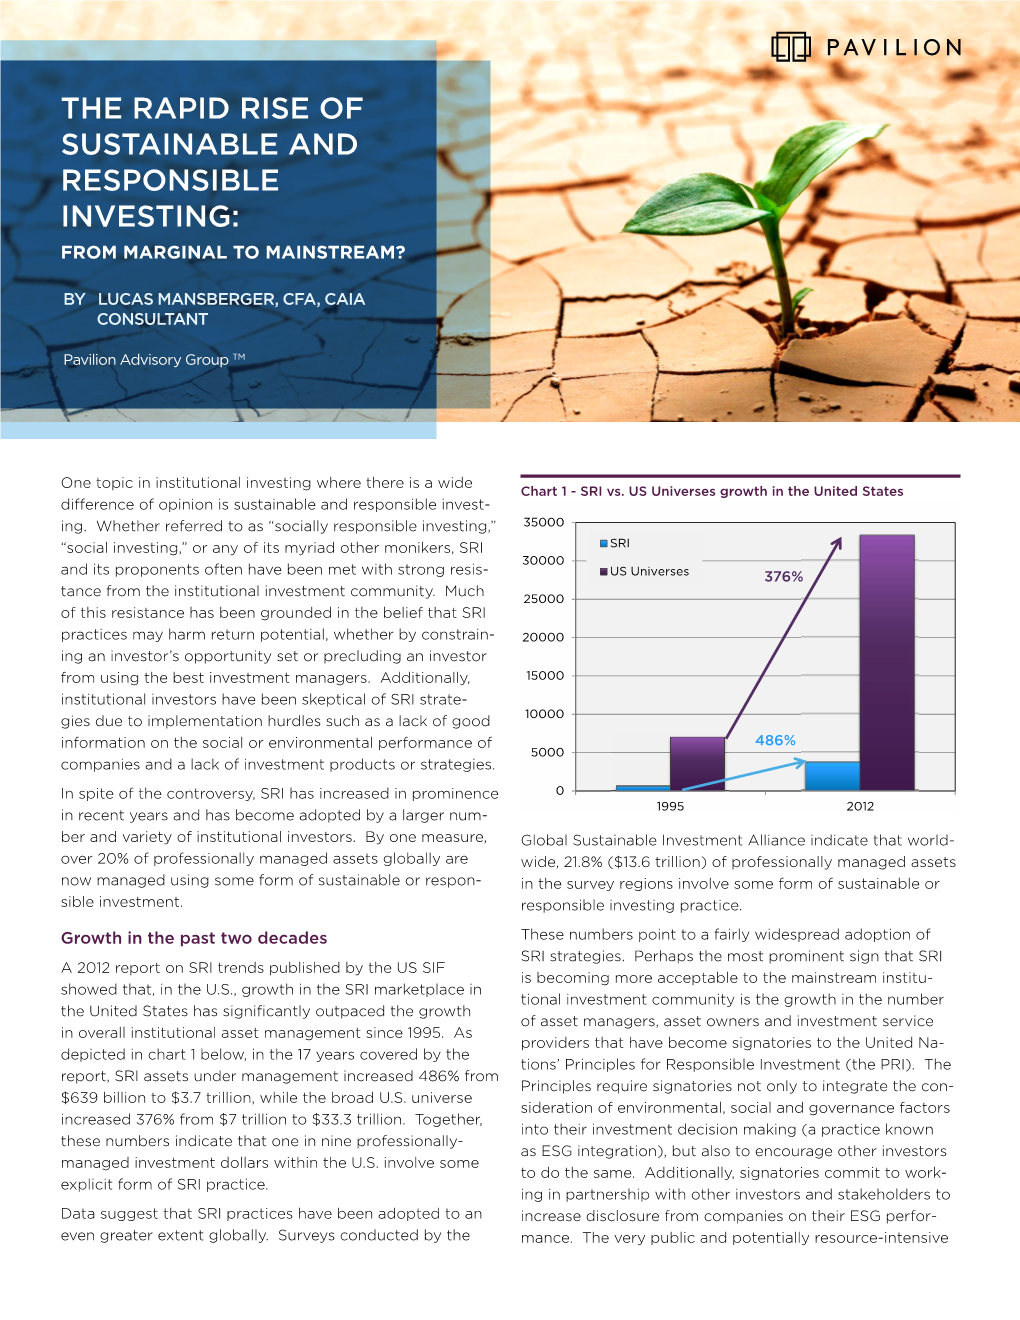 The Rapid Rise of Sustainable and Responsible Investing: from Marginal to Mainstream?